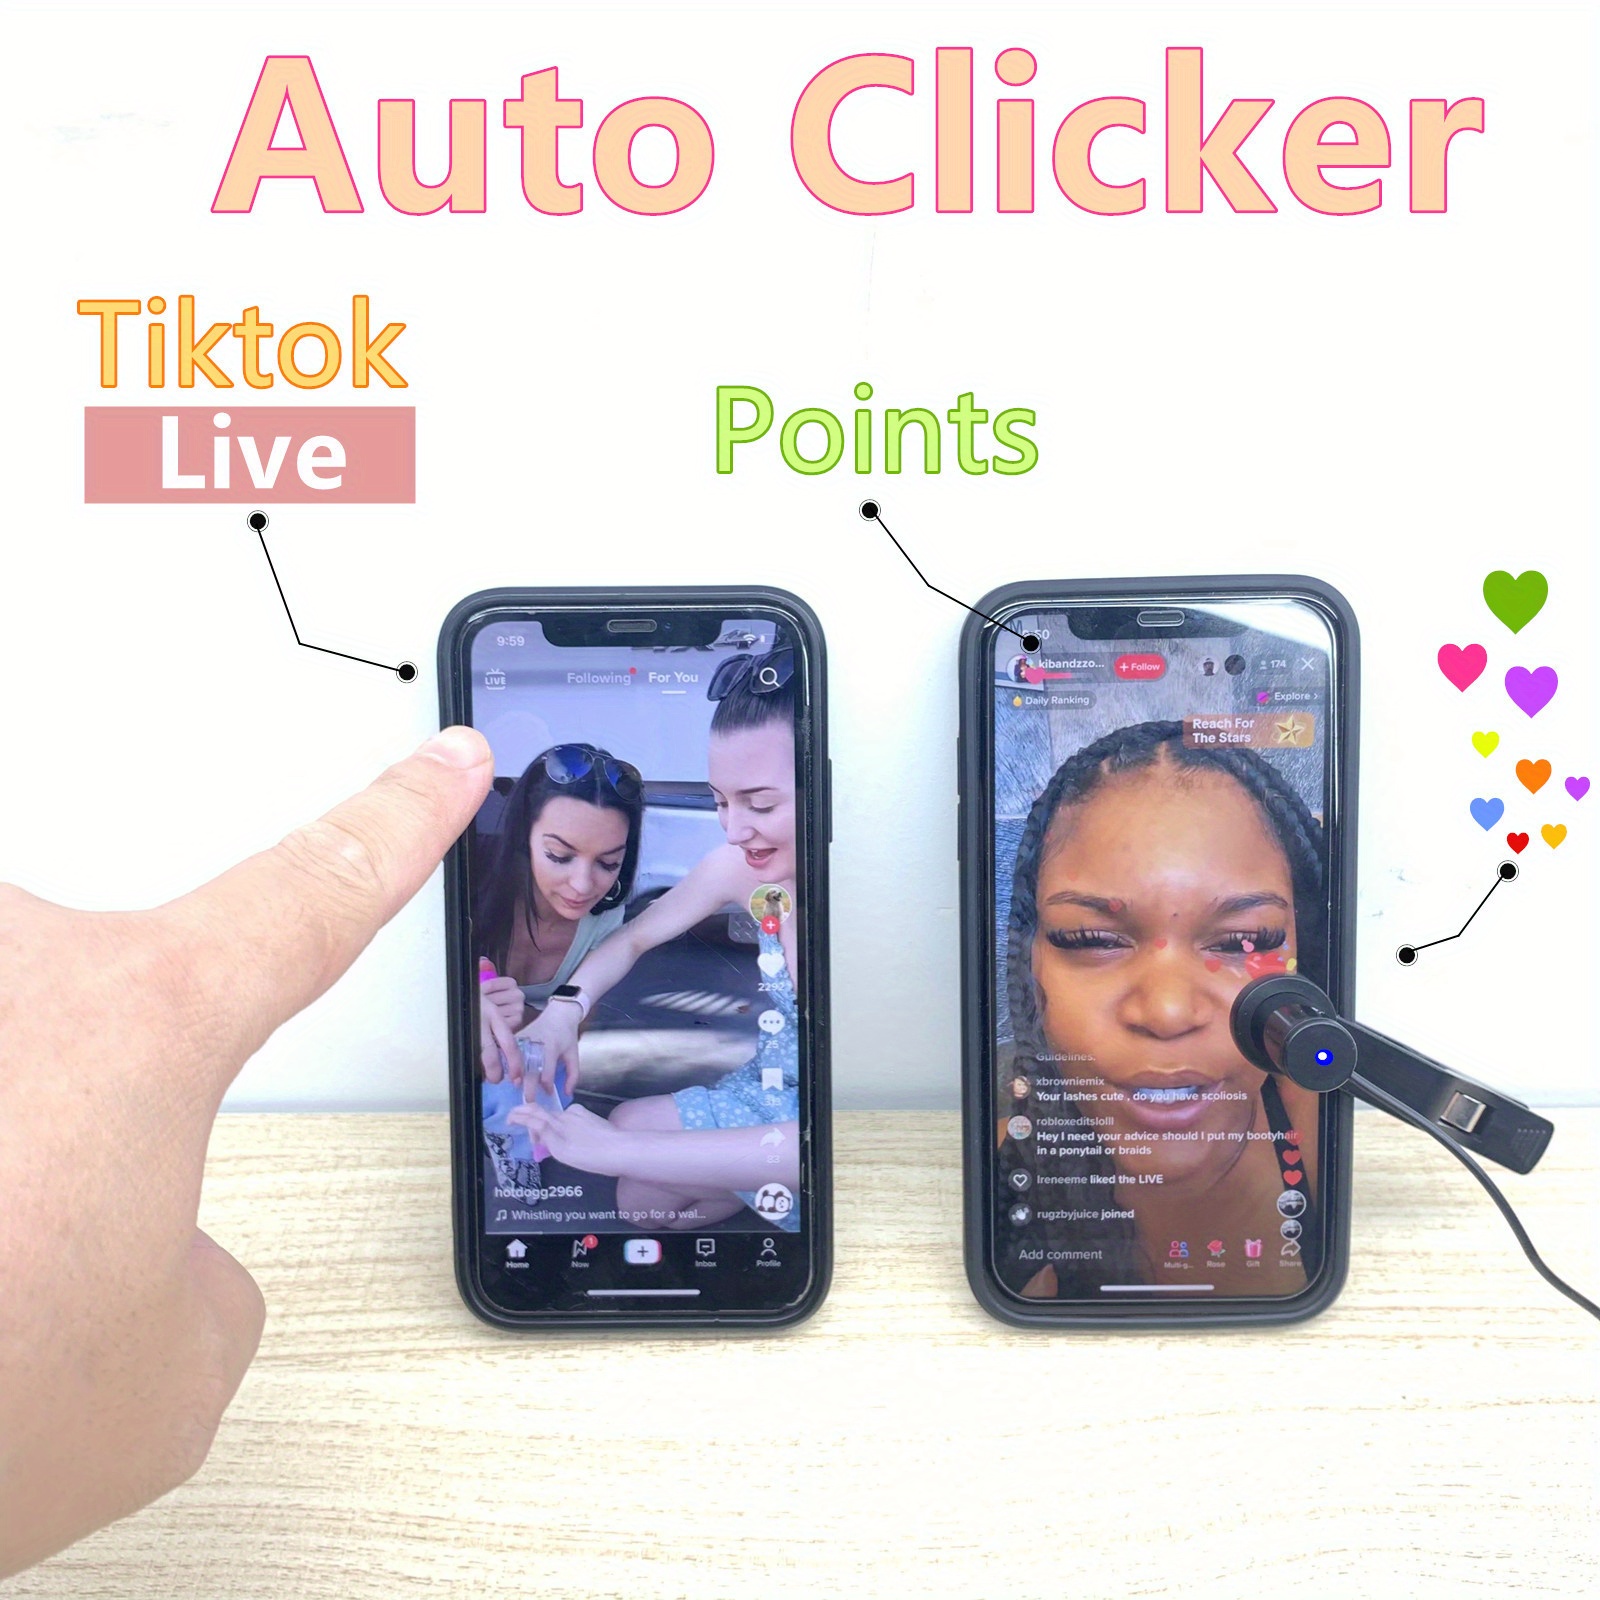 Auto Clicker for iPhone iPad, Phone Screen Device Speed Clicker for Android  IOS, Simulated Finger Continuous Clicking, Live Broadcasts, Reward Tasks（1